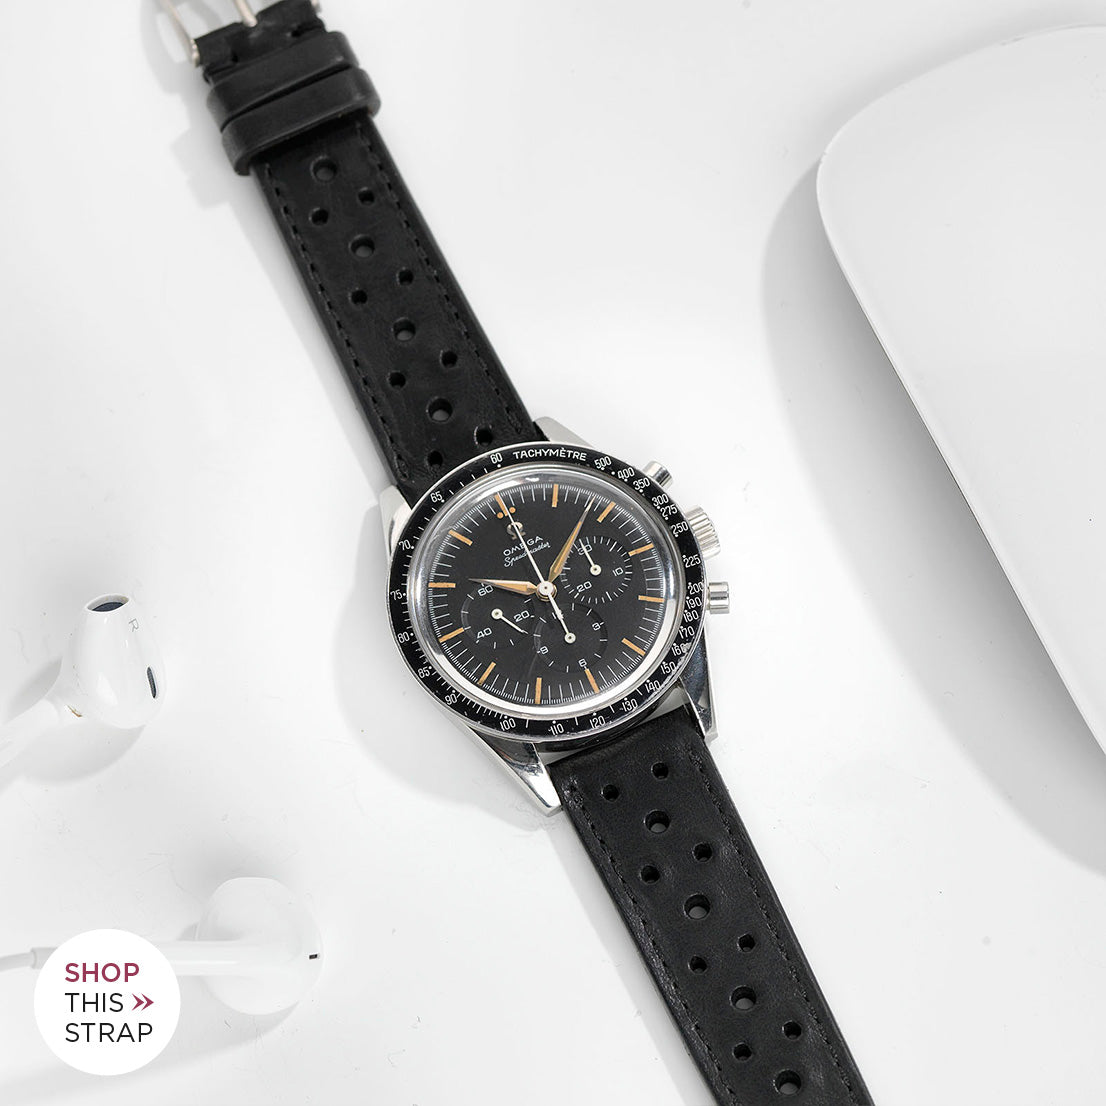 Bulang and Sons_Strap Guide_The Omega Straight Lugs speedmaster_Racing Black Leather Watch Strap